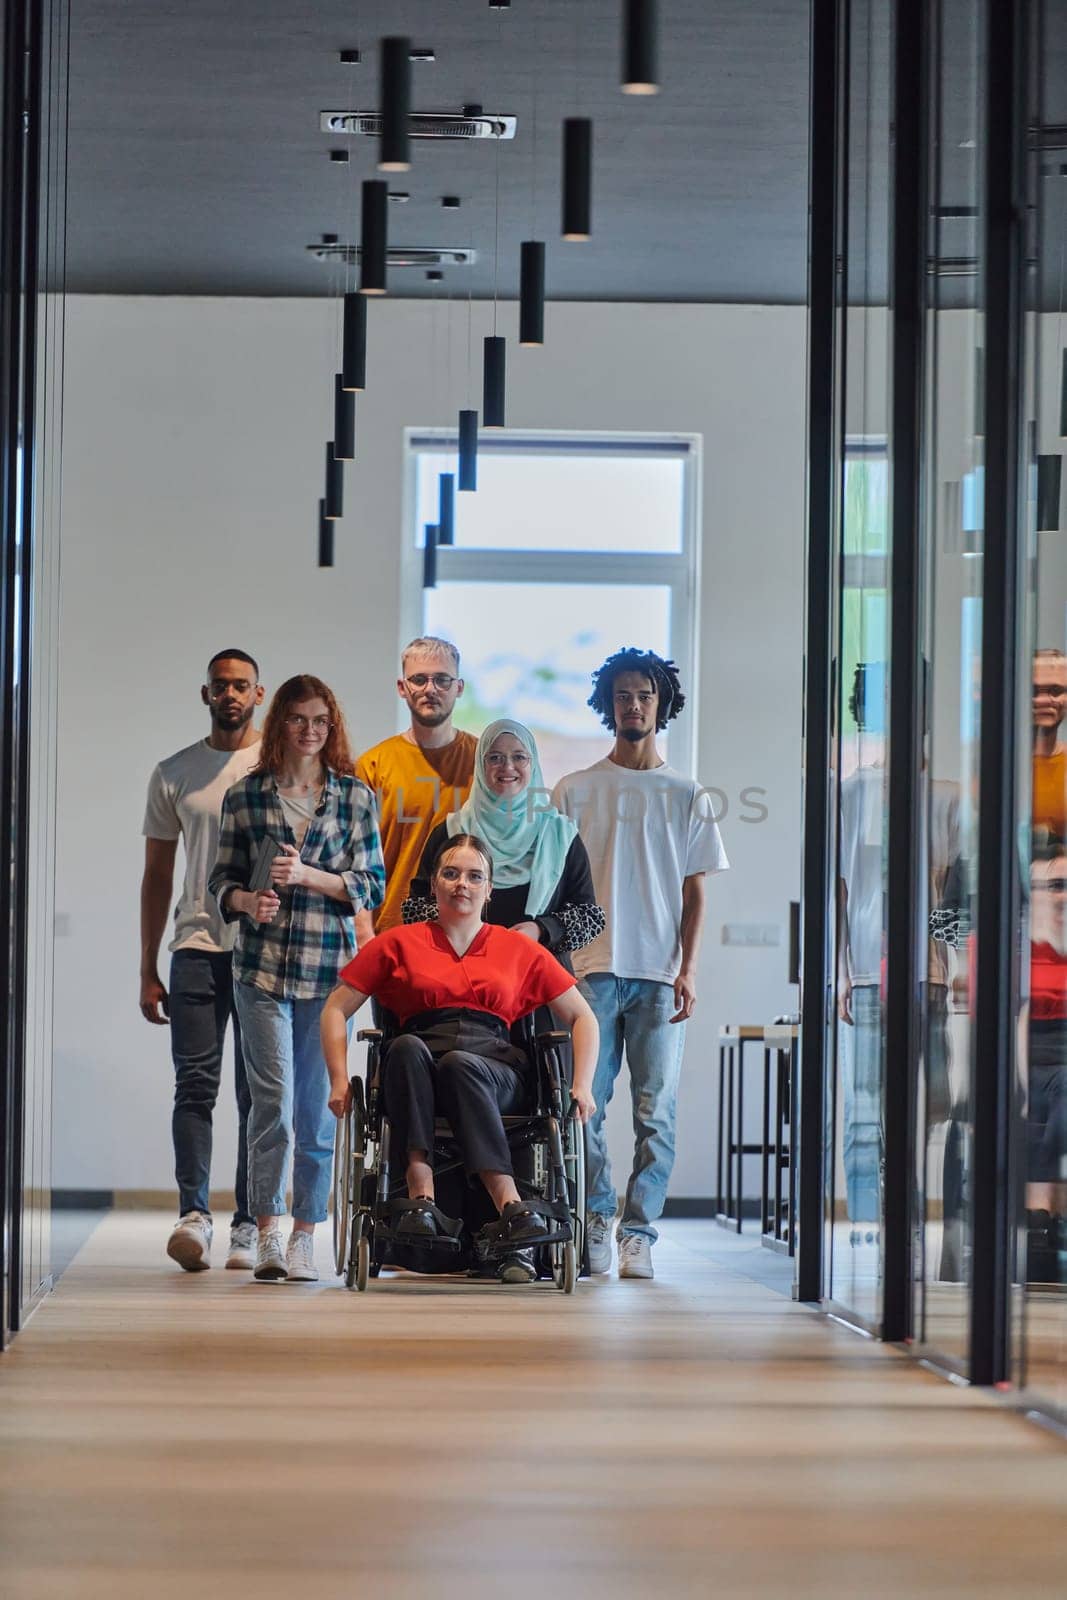 A diverse group of young business people walking a corridor in the glass-enclosed office of a modern startup, including a person in a wheelchair and a woman wearing a hijab, showing a dynamic mix of innovation and unity. by dotshock